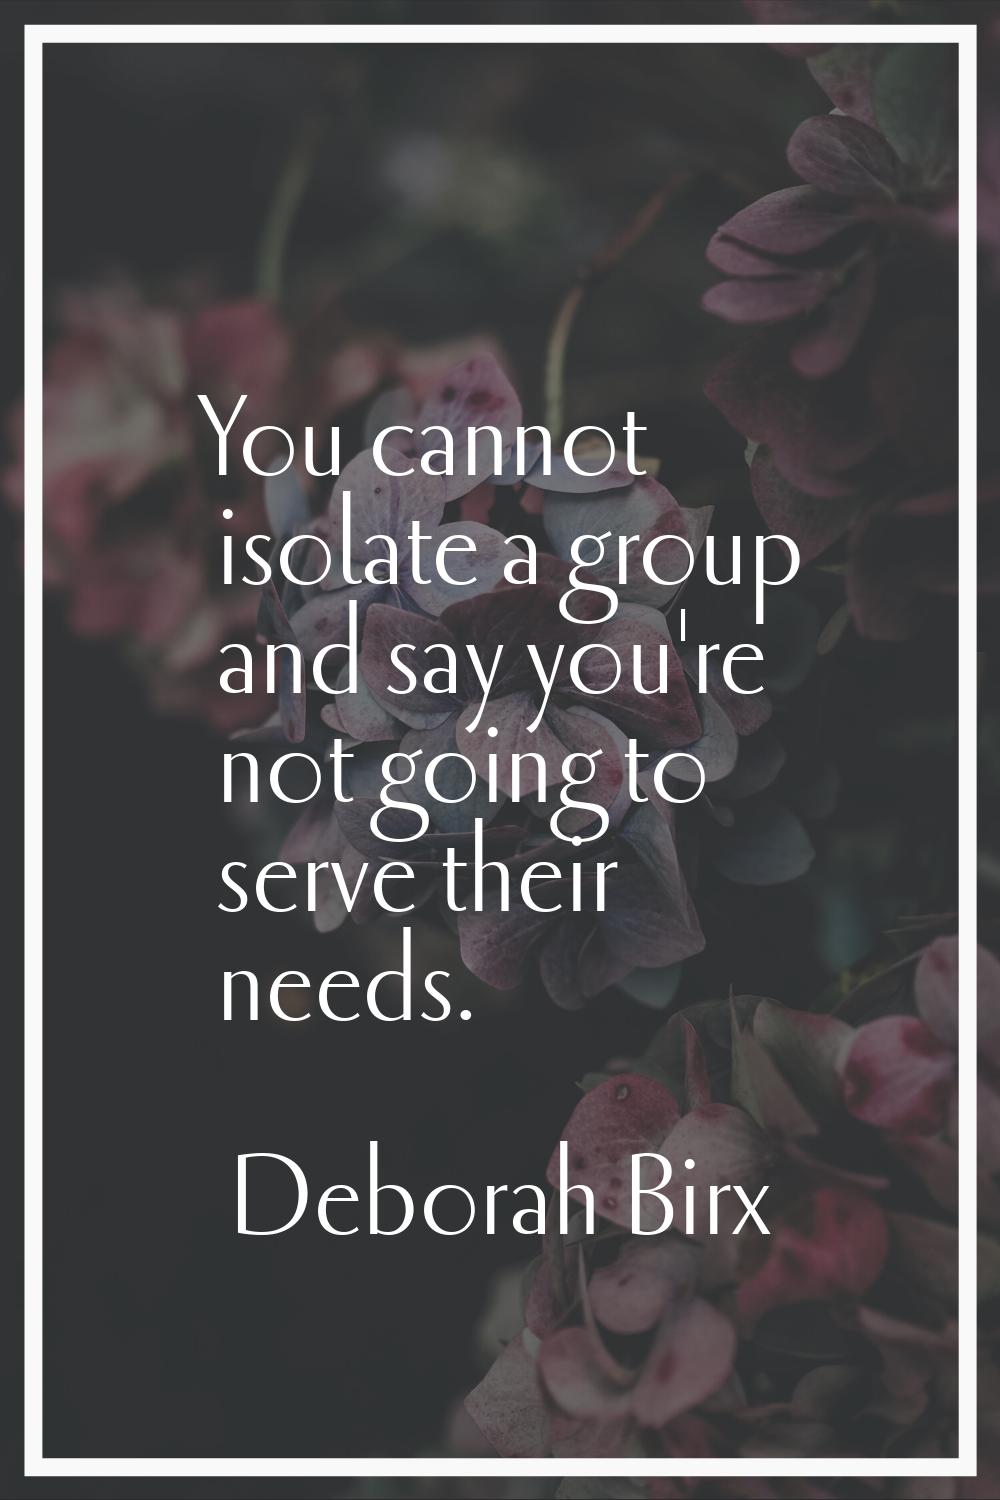 You cannot isolate a group and say you're not going to serve their needs.